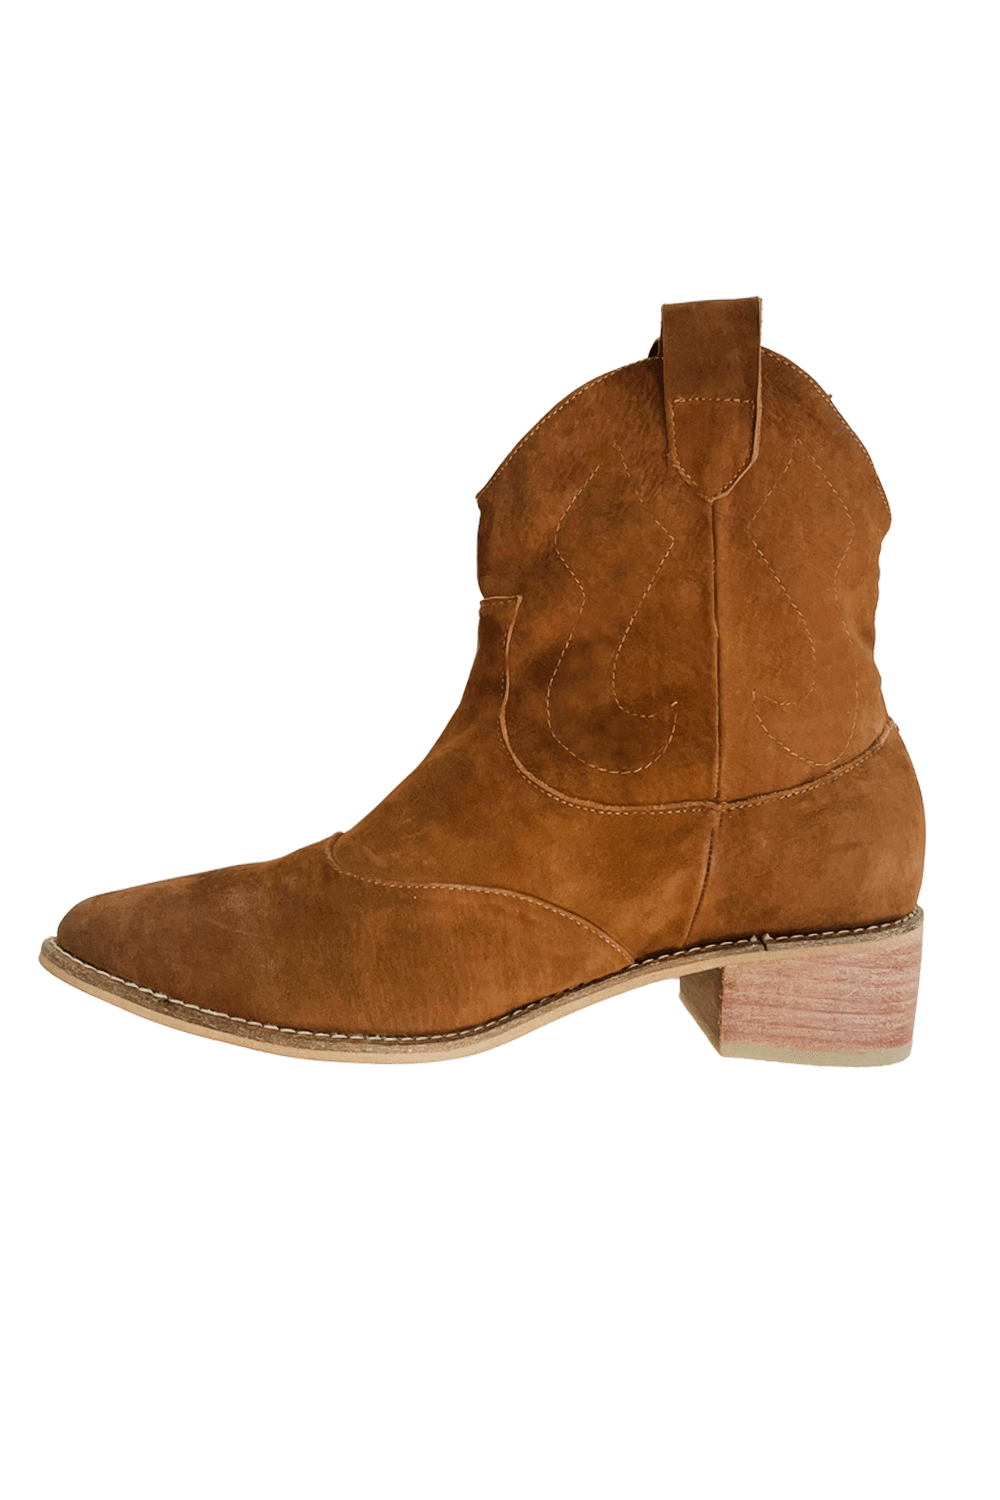 Cassidy Leather Boots in Tan Shoes